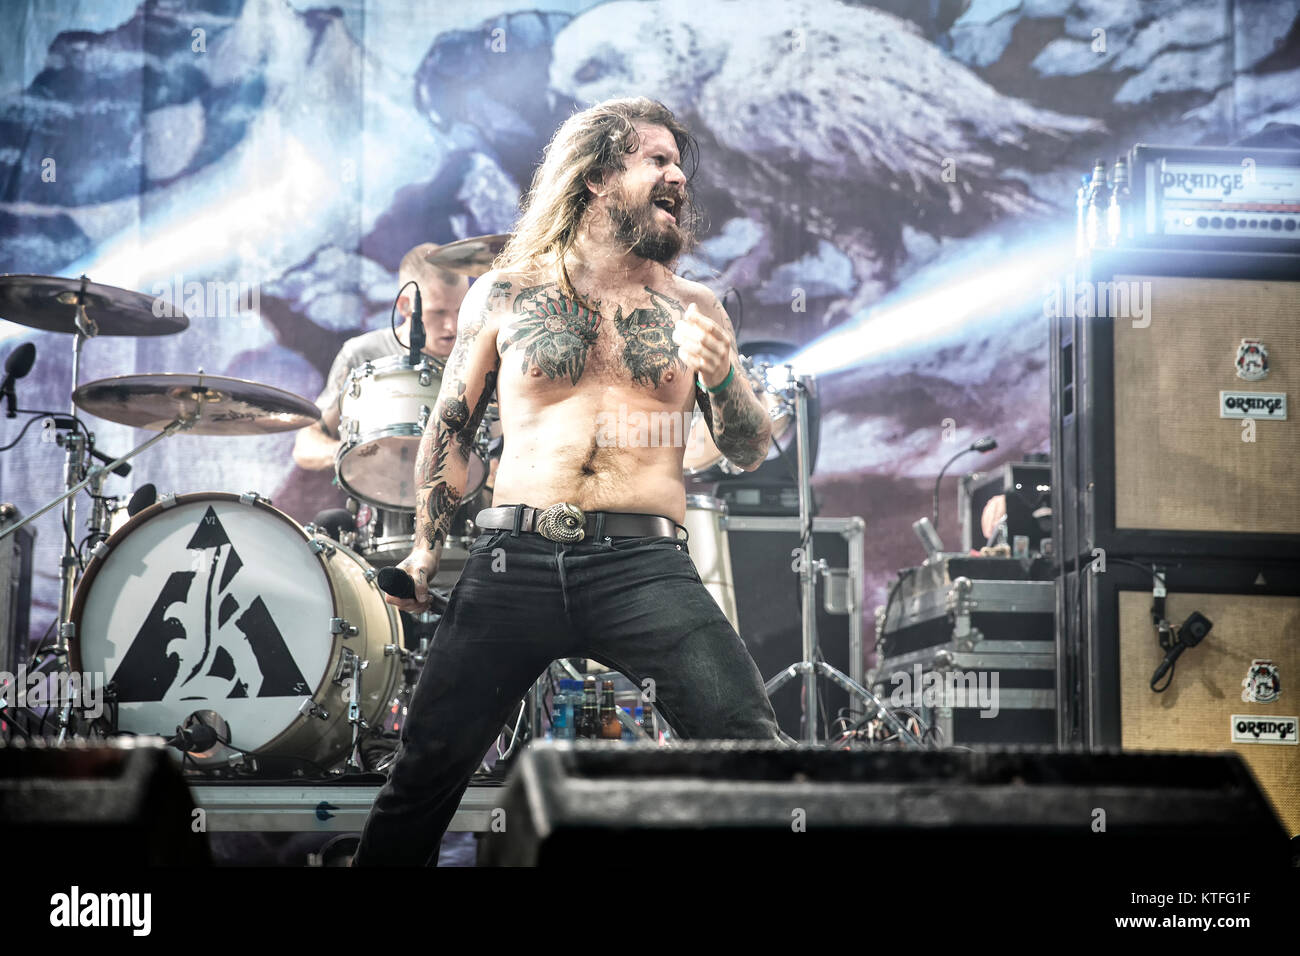 The Norwegian black metal and heavy metal band Kvelertak performs a live concert at at the Norwegian music festival Øyafestivalen 2016 in Oslo. Here vocalist Erlend Hjelvik is seen live on stage. Norway, 13/08 2016. Stock Photo